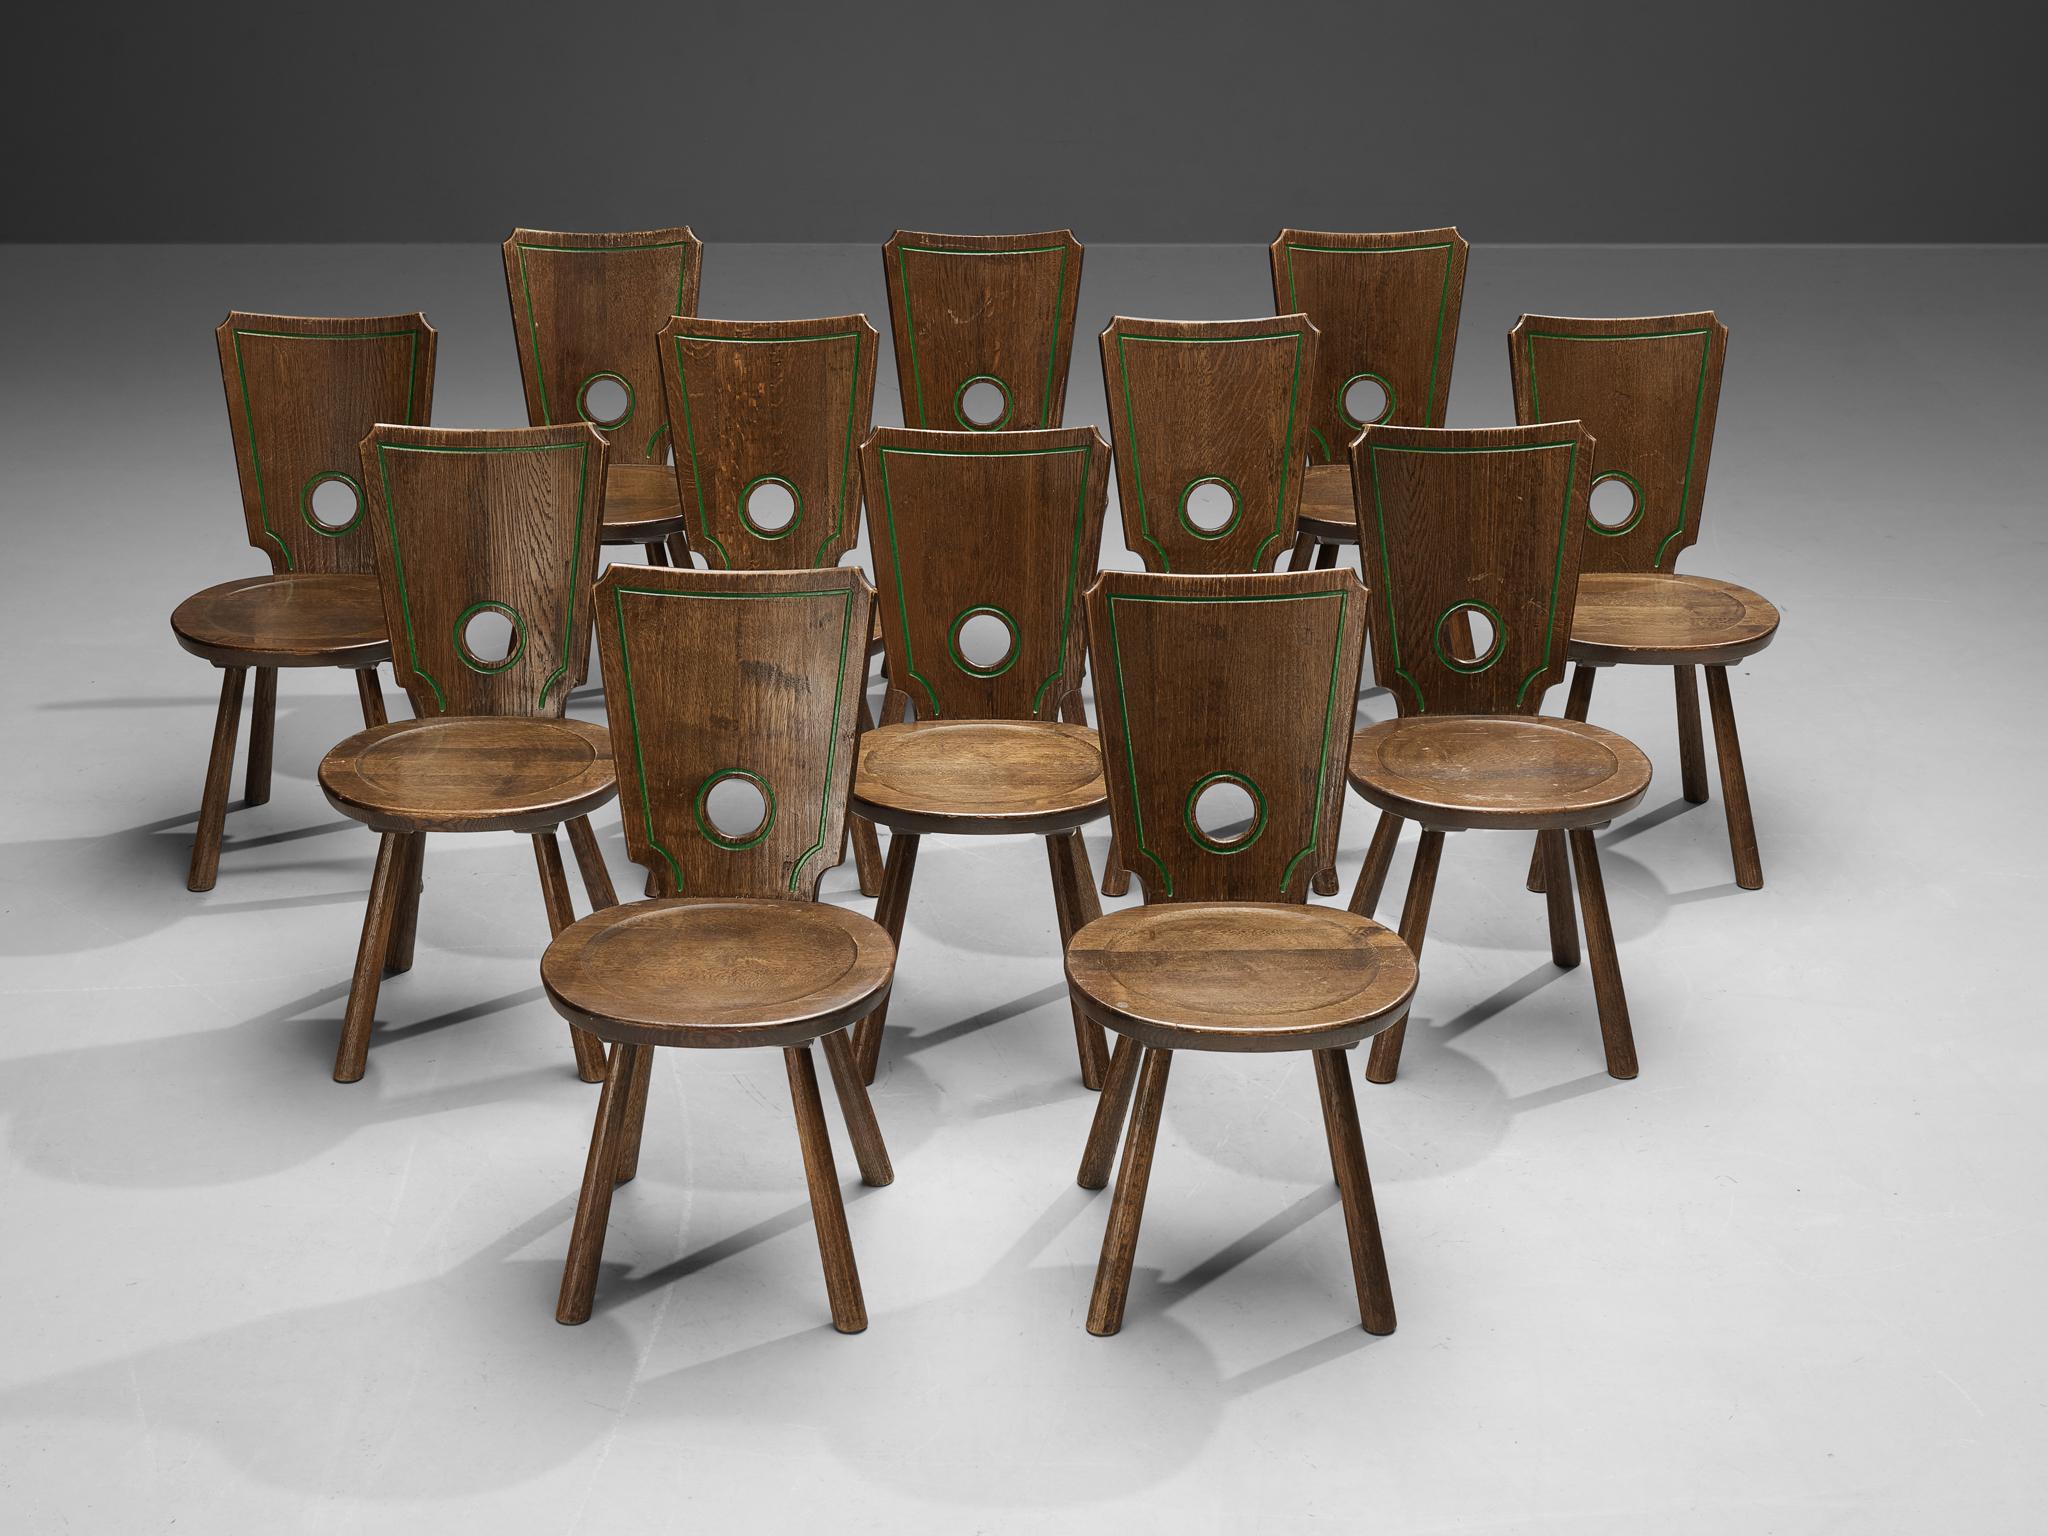 Bronze Set of Twelve Rustic French Dining Chairs in Solid Oak